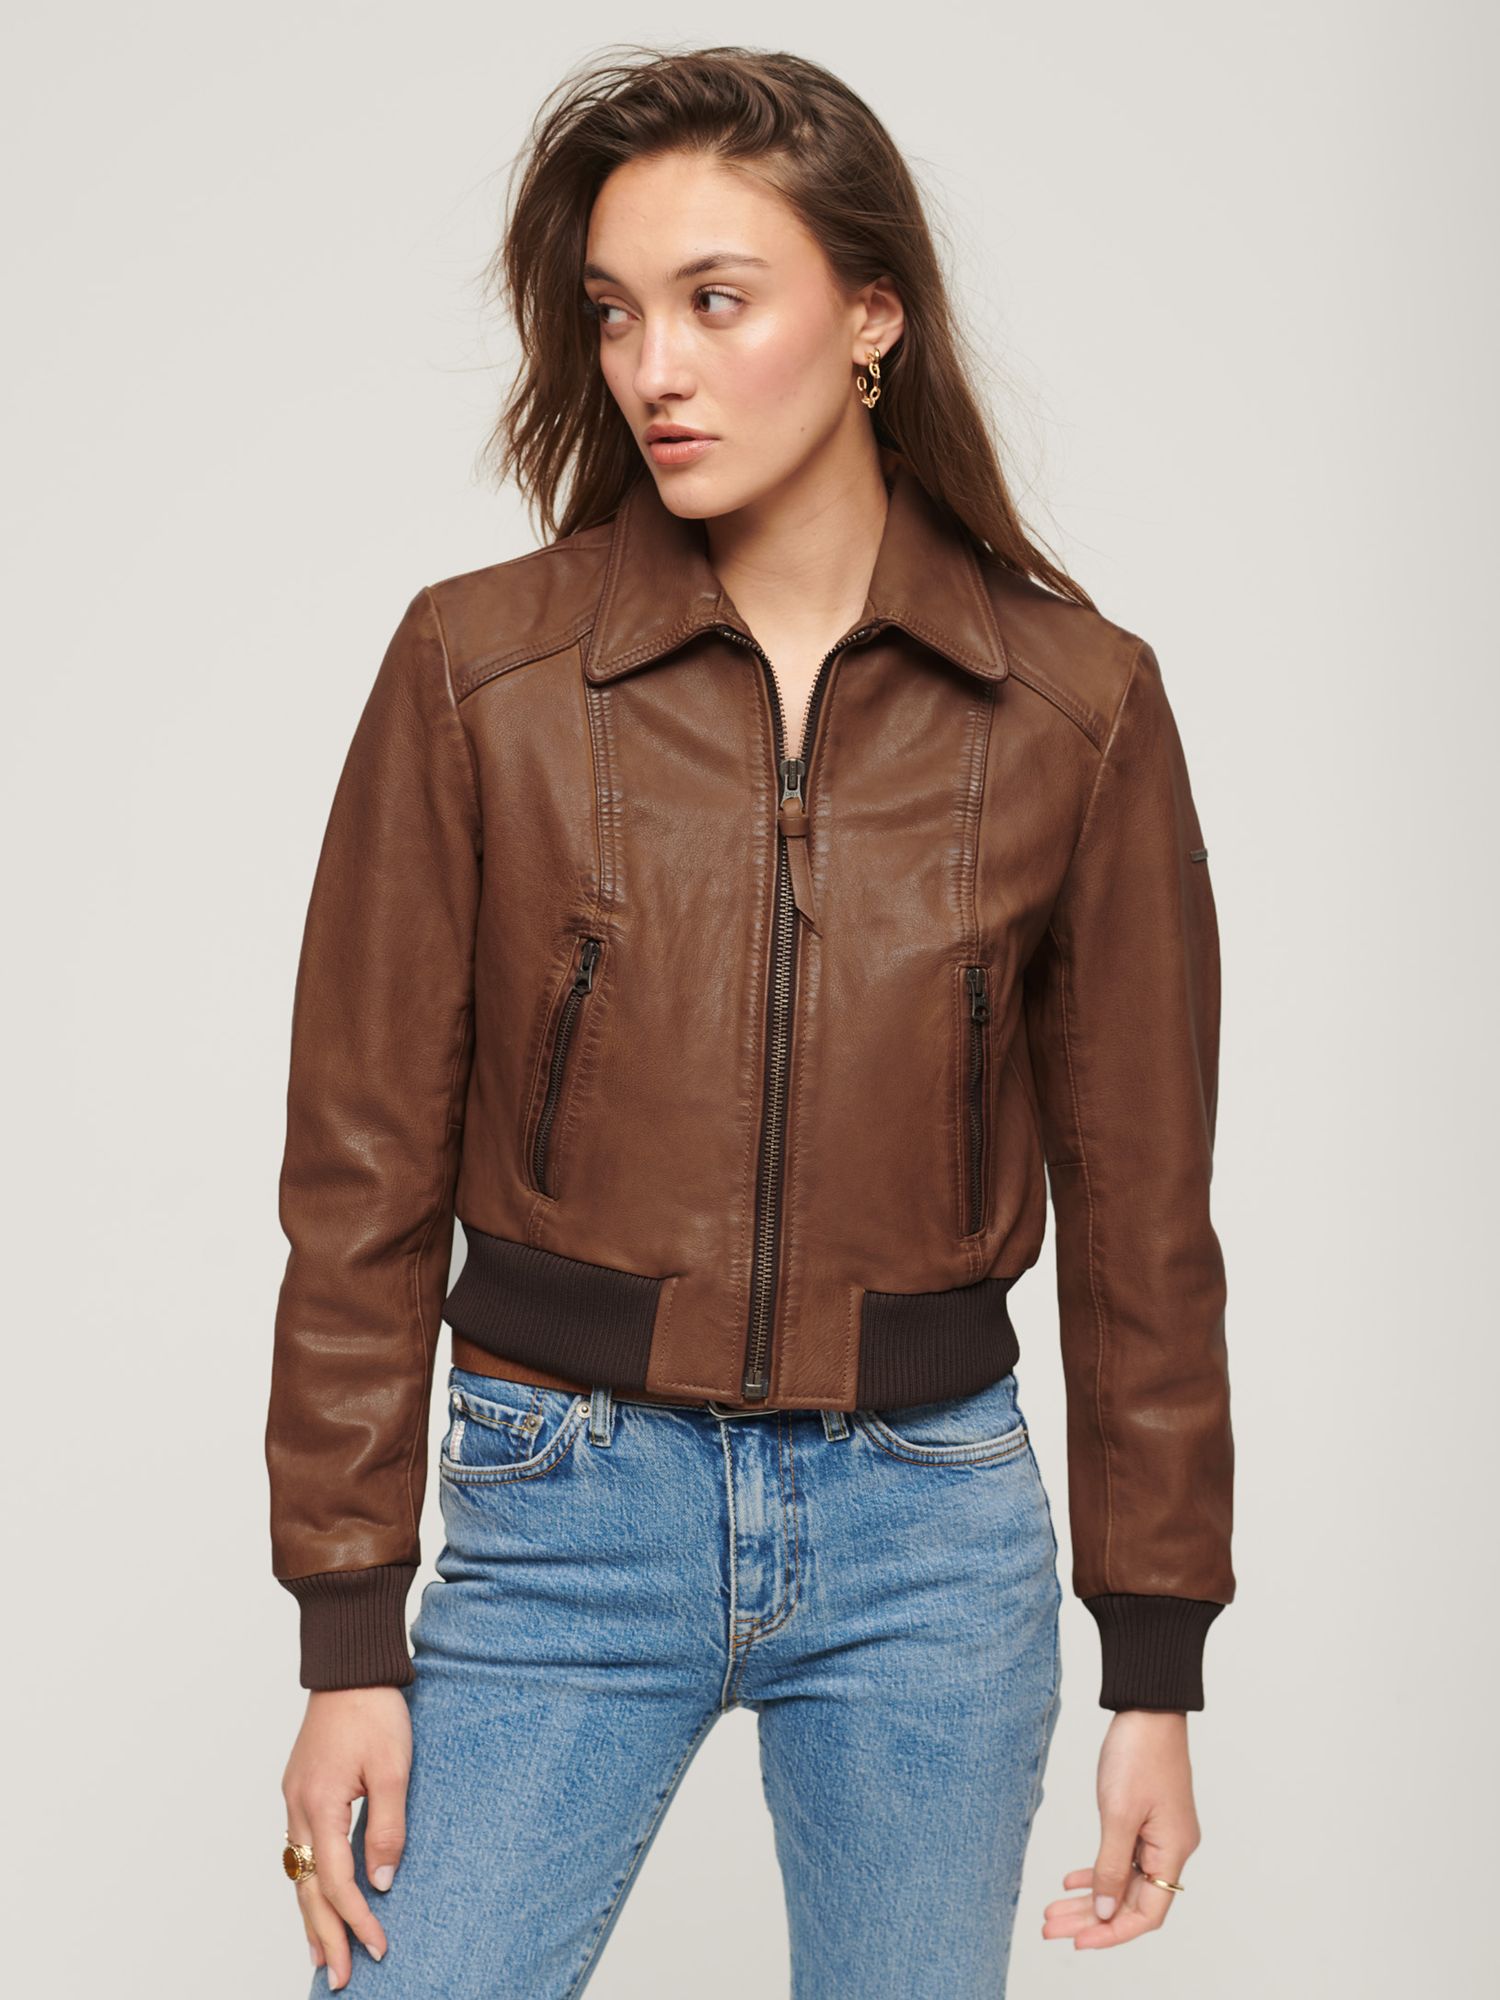 Superdry 70s Leather Jacket, Washed Tan at John Lewis & Partners